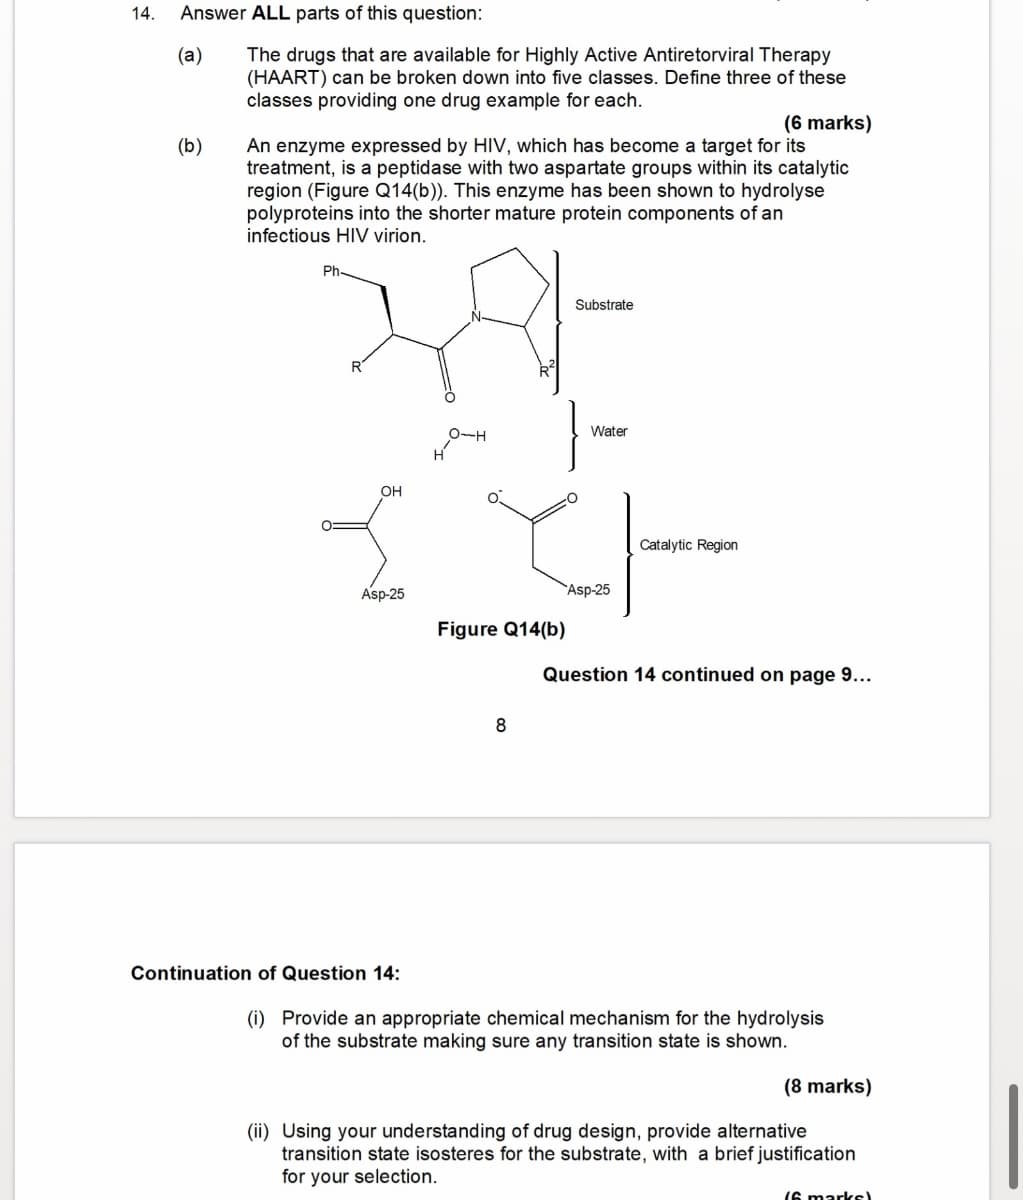 14. Answer ALL parts of this question:
(a)
(b)
The drugs that are available for Highly Active Antiretorviral Therapy
(HAART) can be broken down into five classes. Define three of these
classes providing one drug example for each.
(6 marks)
An enzyme expressed by HIV, which has become a target for its
treatment, is a peptidase with two aspartate groups within its catalytic
region (Figure Q14(b)). This enzyme has been shown to hydrolyse
polyproteins into the shorter mature protein components of an
infectious HIV virion.
Ph-
R
OH
Asp-25
H-O
Substrate
Water
Catalytic Region
Asp-25
Figure Q14(b)
Question 14 continued on page 9...
8
Continuation of Question 14:
(i) Provide an appropriate chemical mechanism for the hydrolysis
of the substrate making sure any transition state is shown.
(8 marks)
(ii) Using your understanding of drug design, provide alternative
transition state isosteres for the substrate, with a brief justification
for your selection.
16 marks)